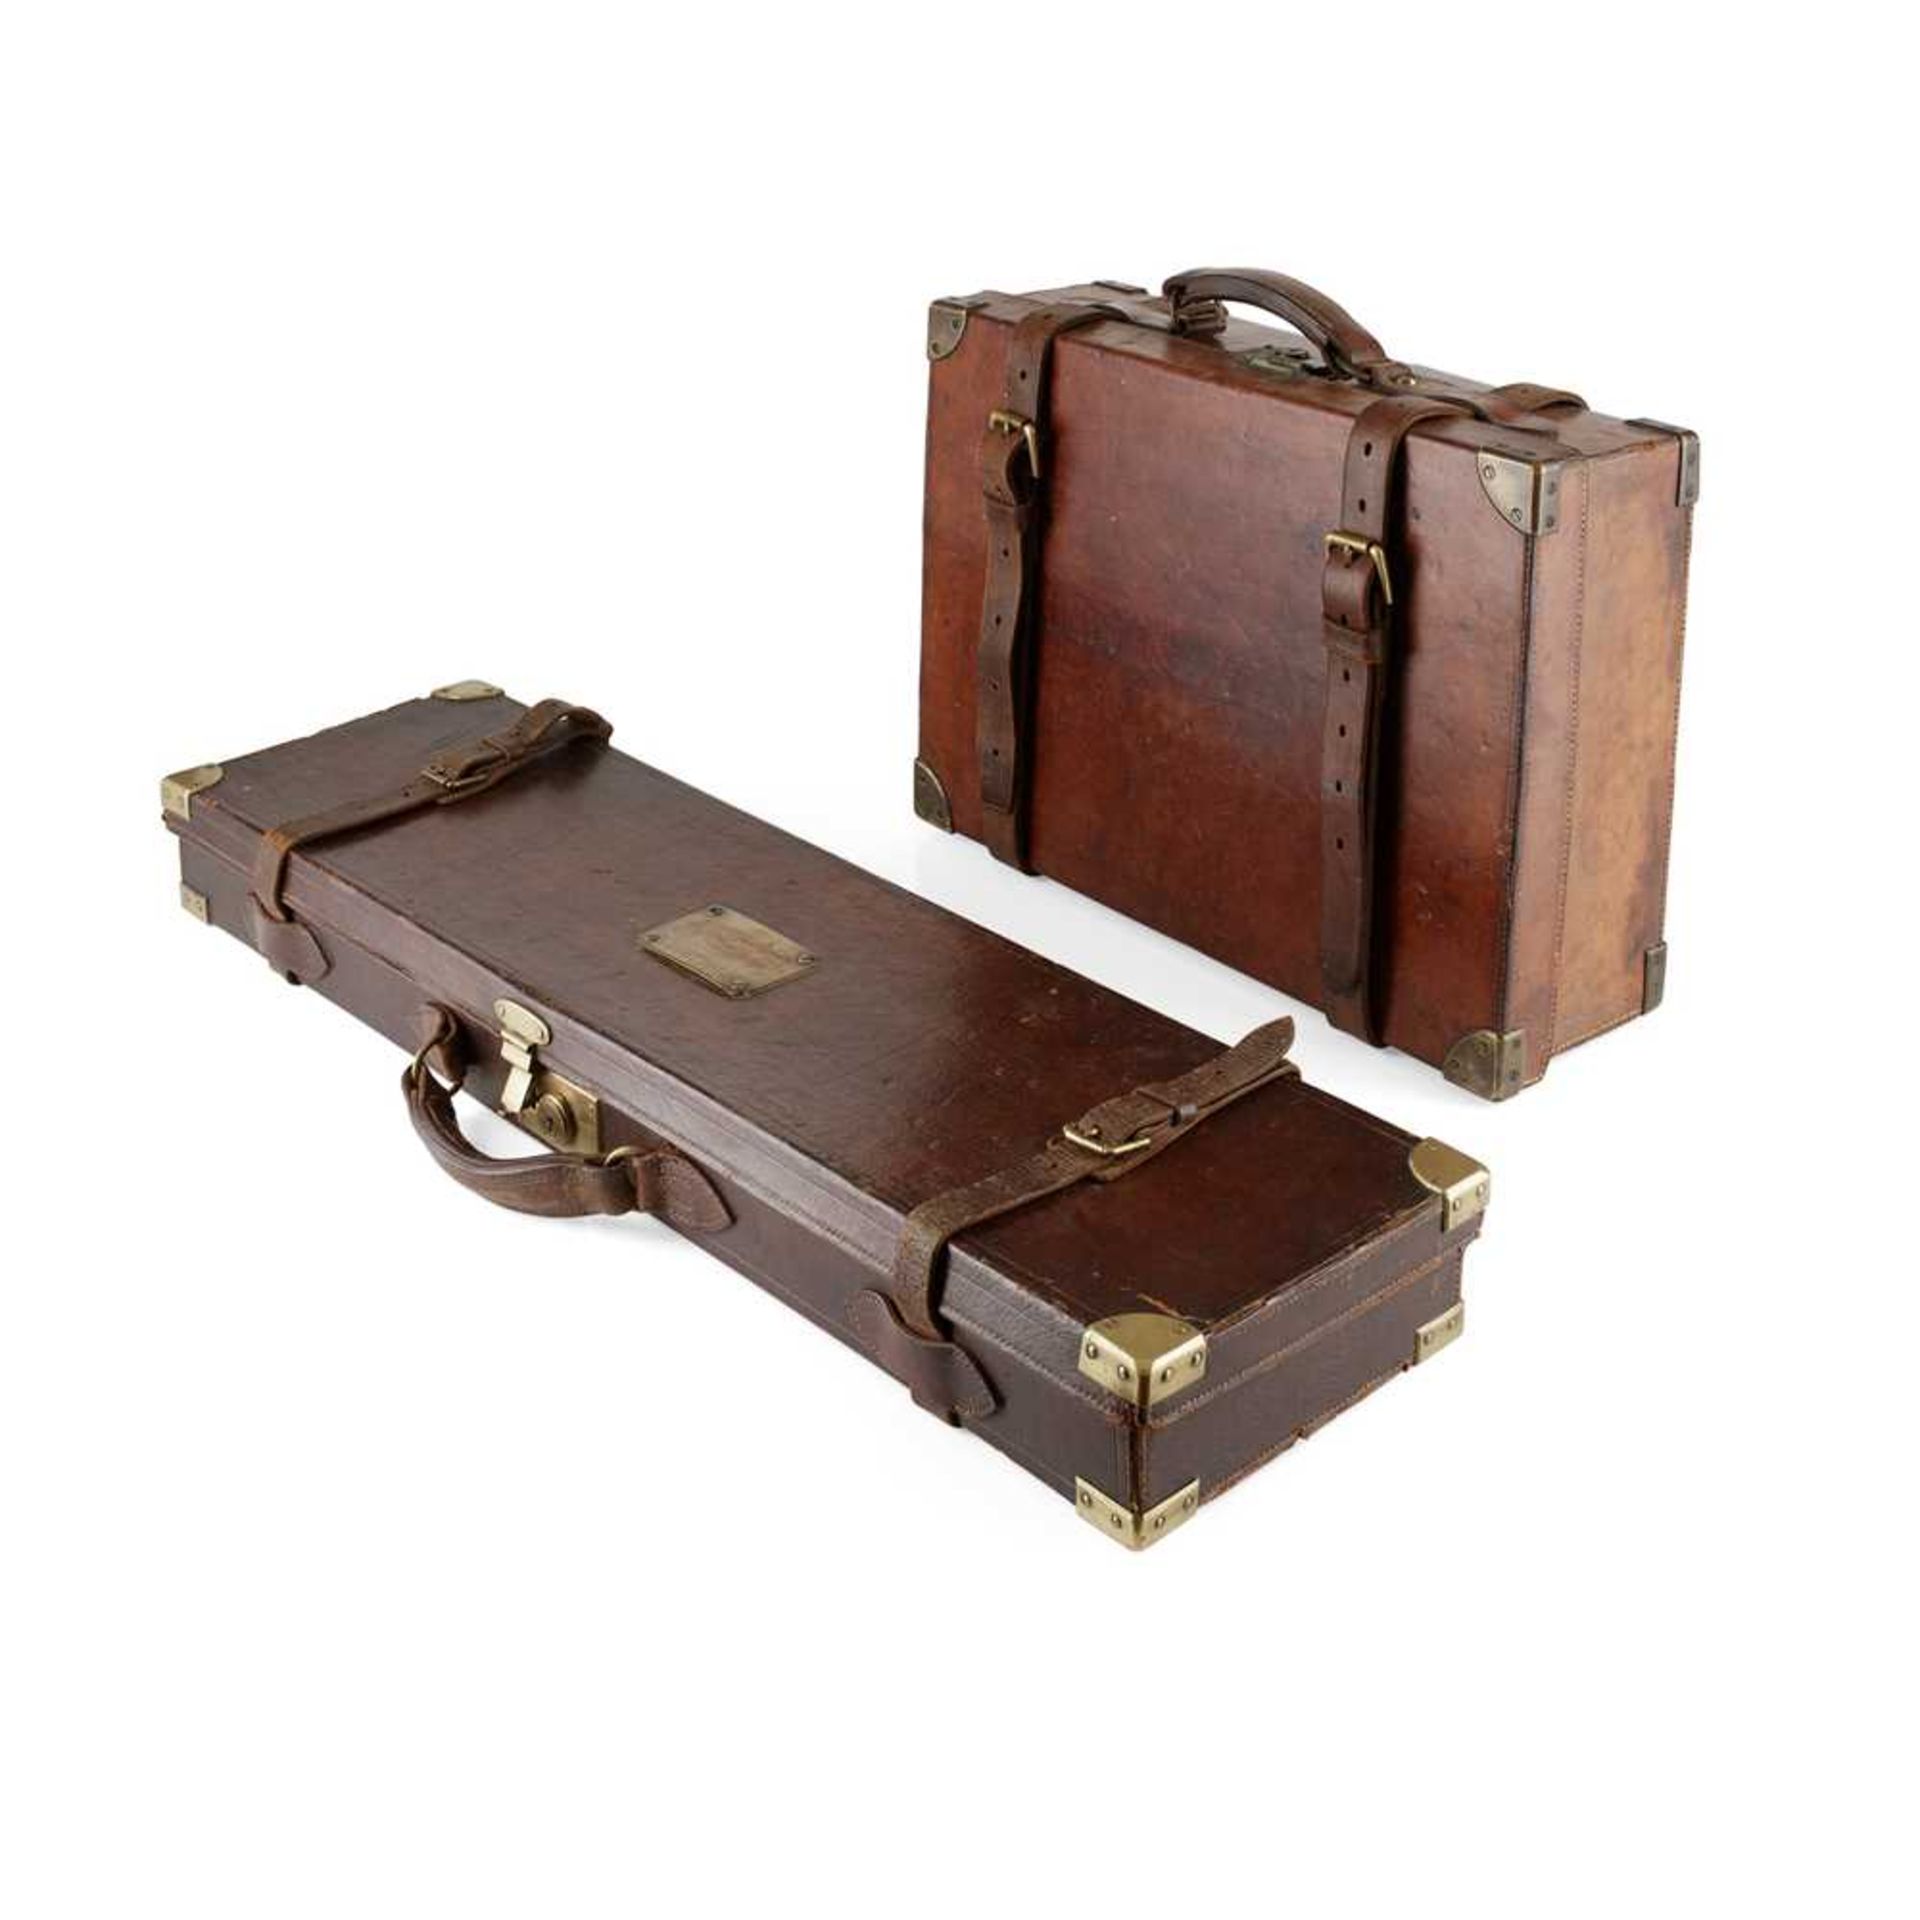 TWO LEATHER SHOOTING CASES EARLY 20TH CENTURY